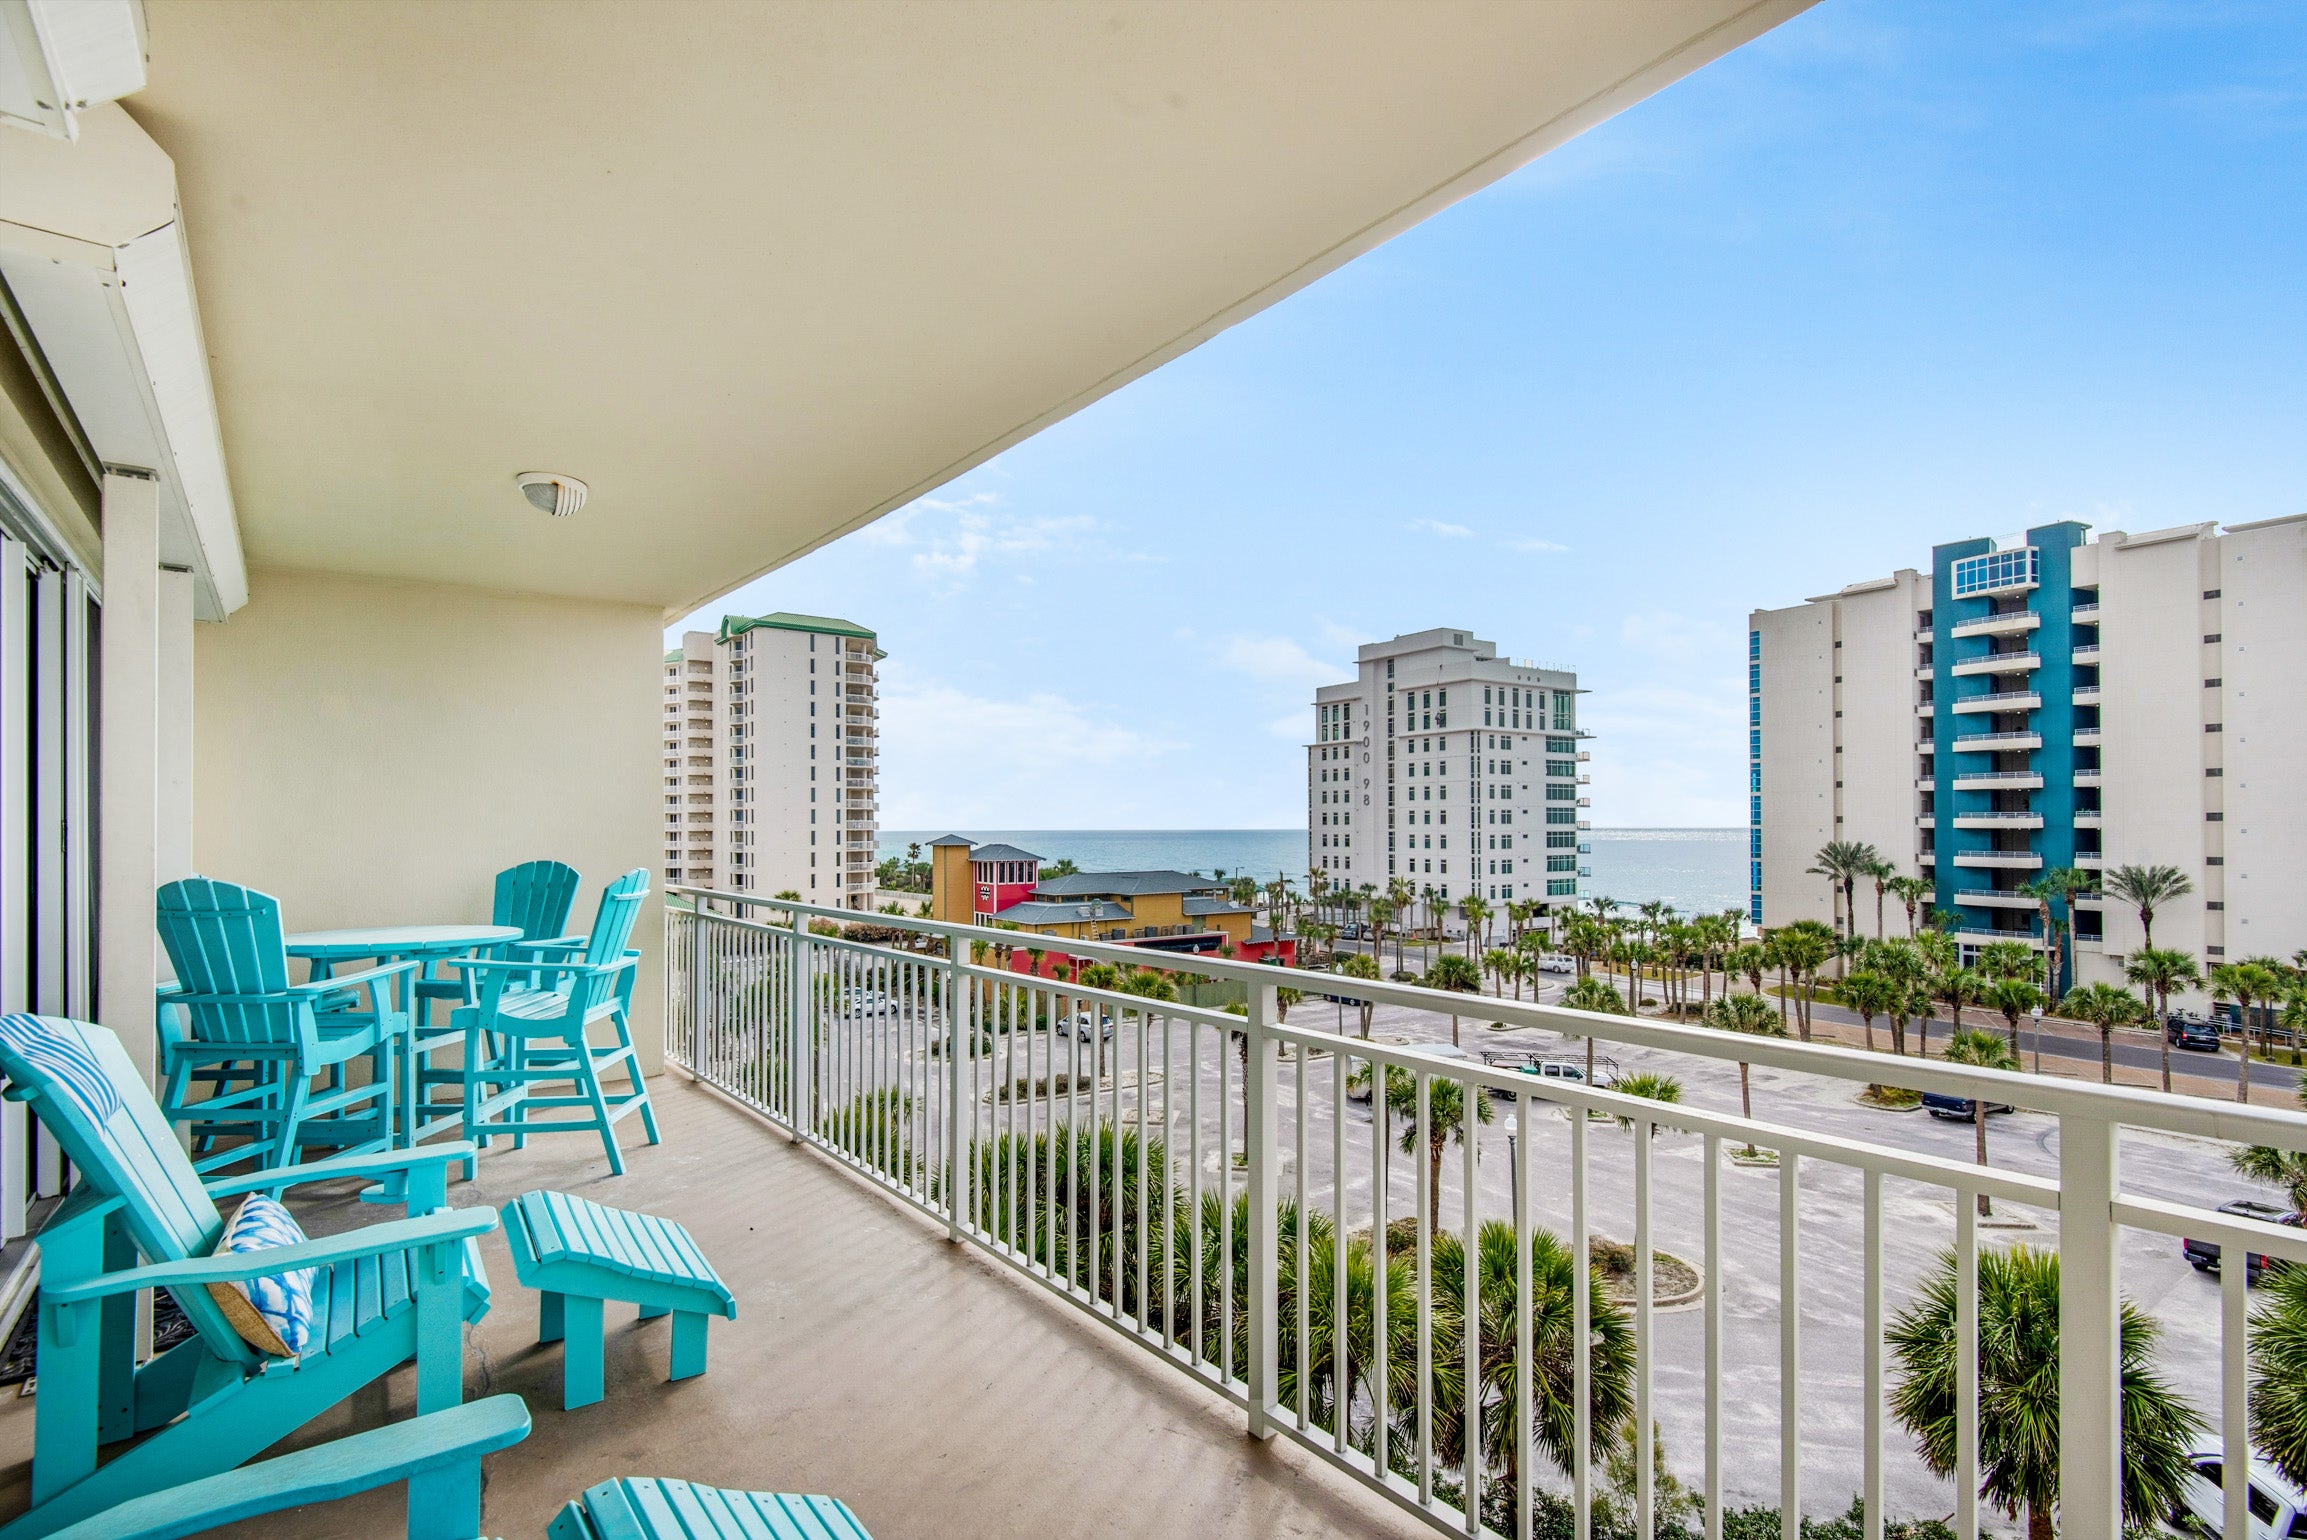 Sterling Shores 502 balcony views